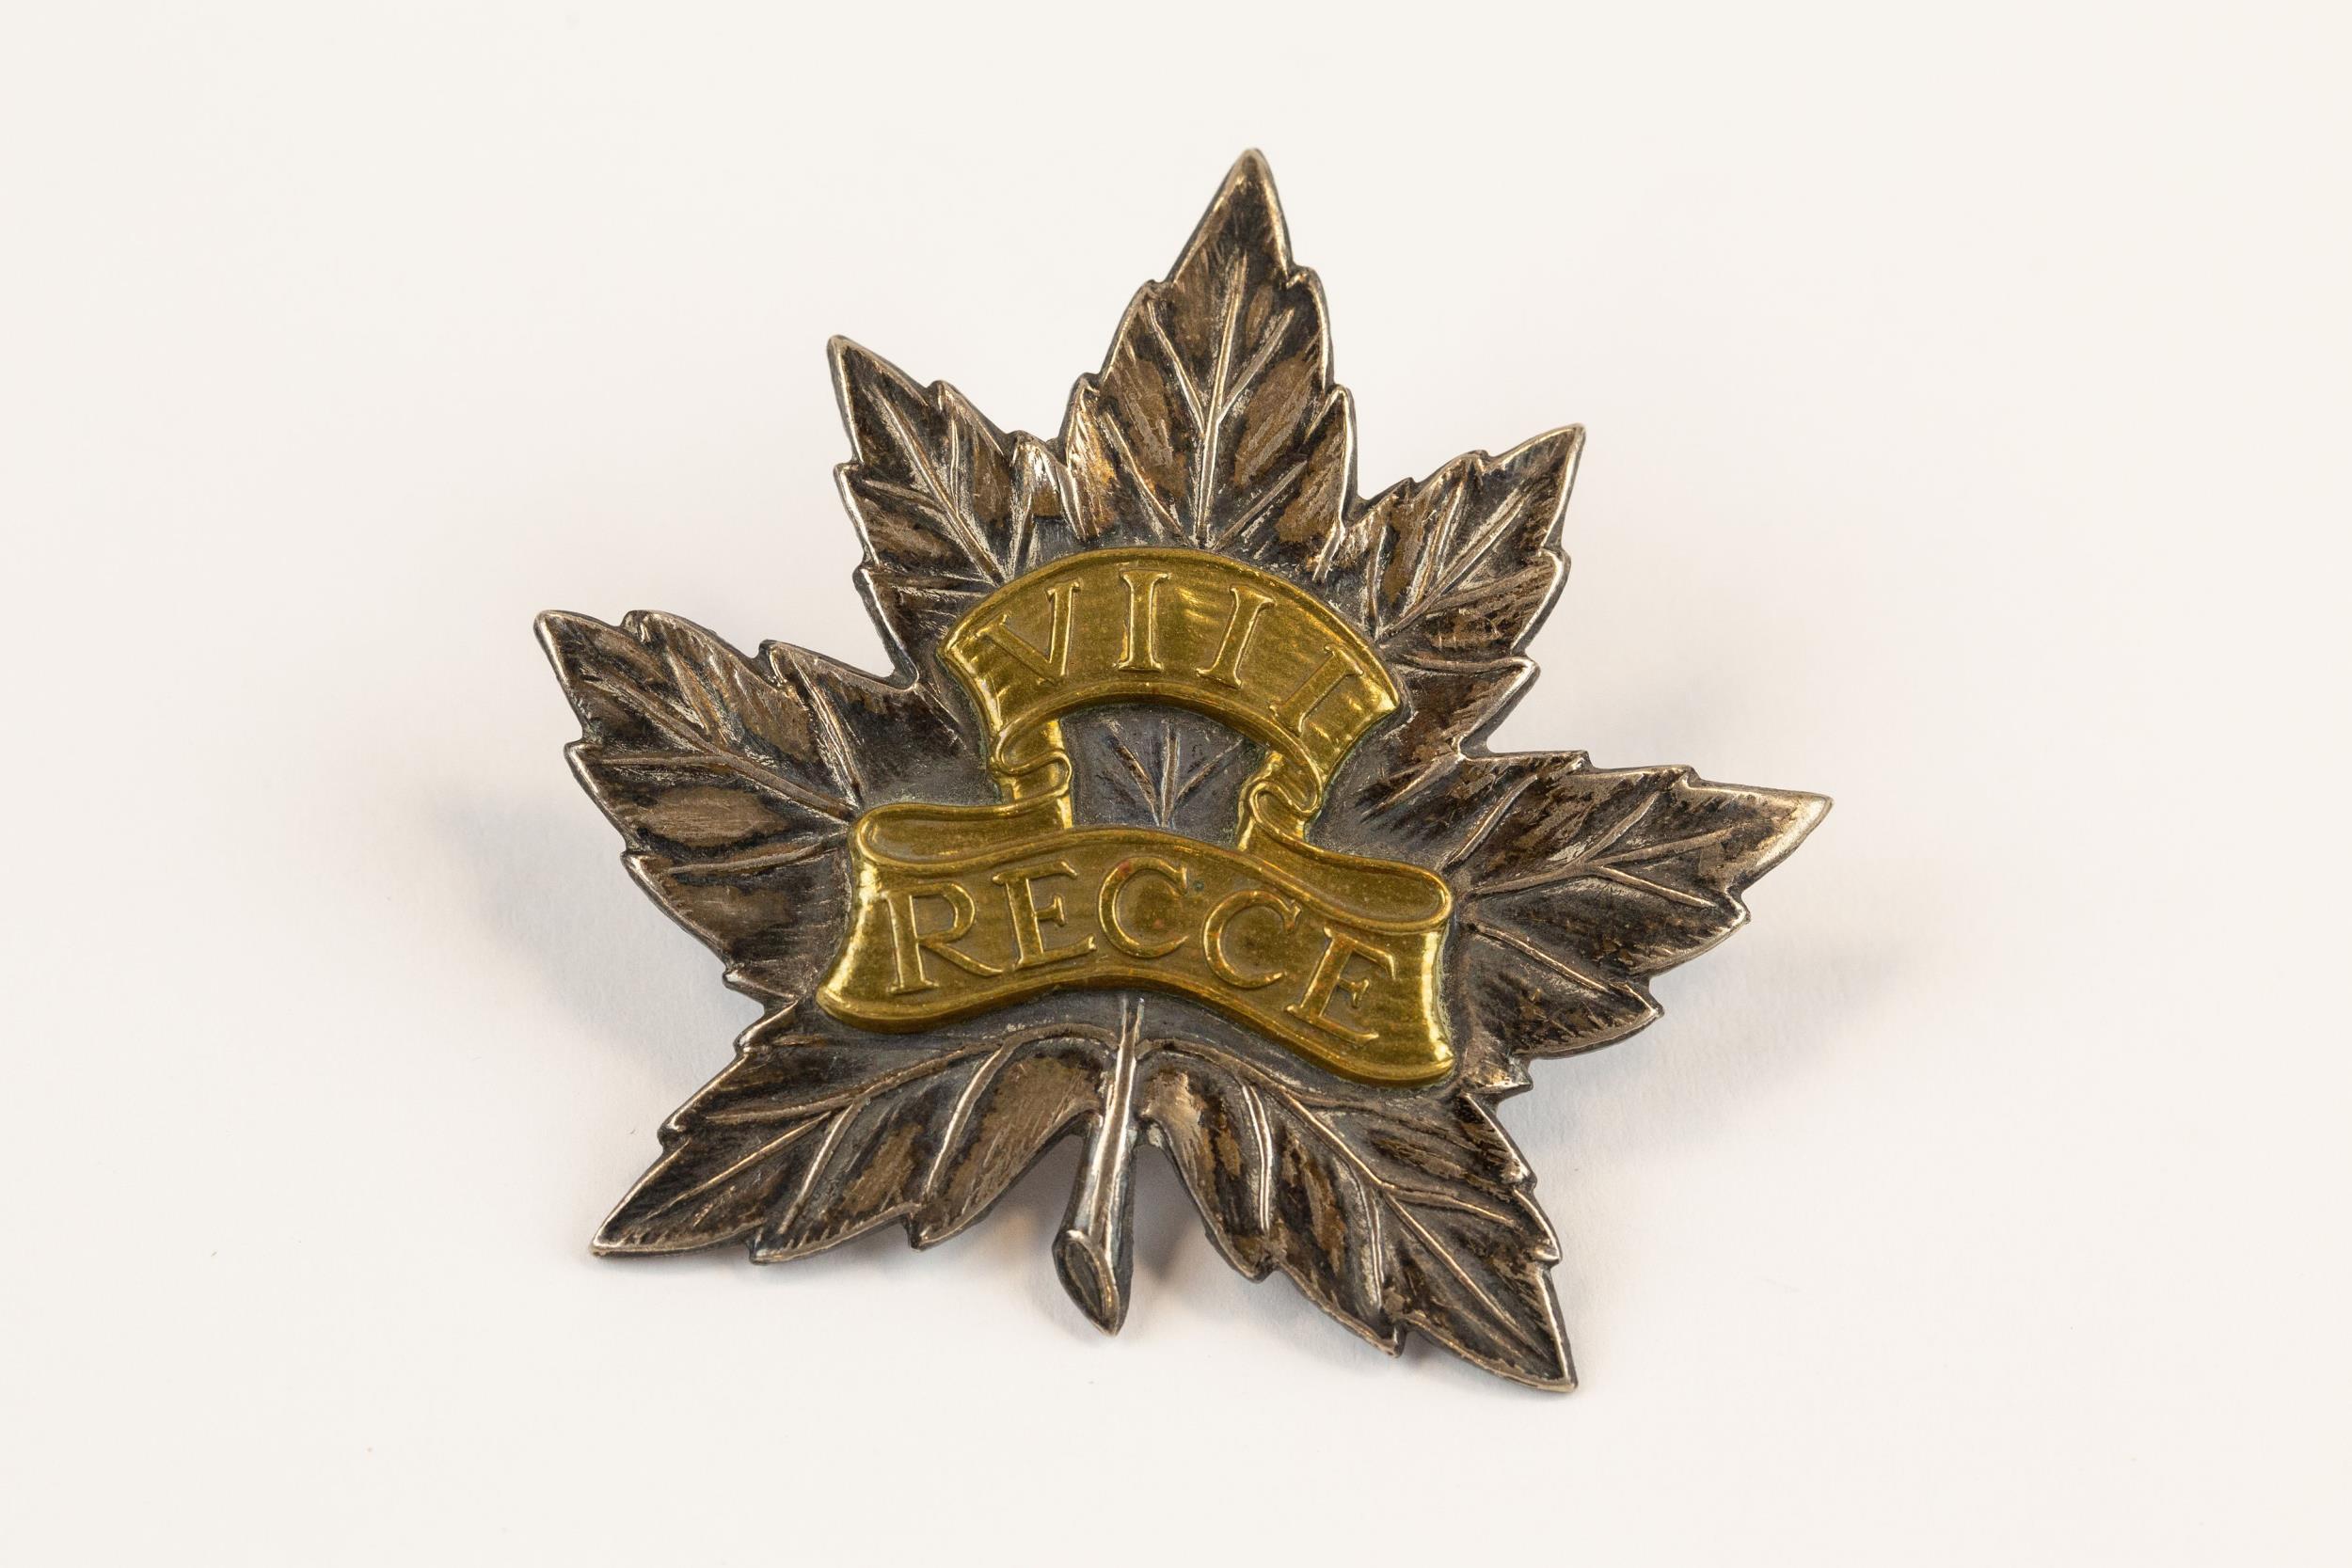 A good scarce WWII Canadian officer's cap badge of the VIIIth Reconnaissance Regiment. GC £200-300